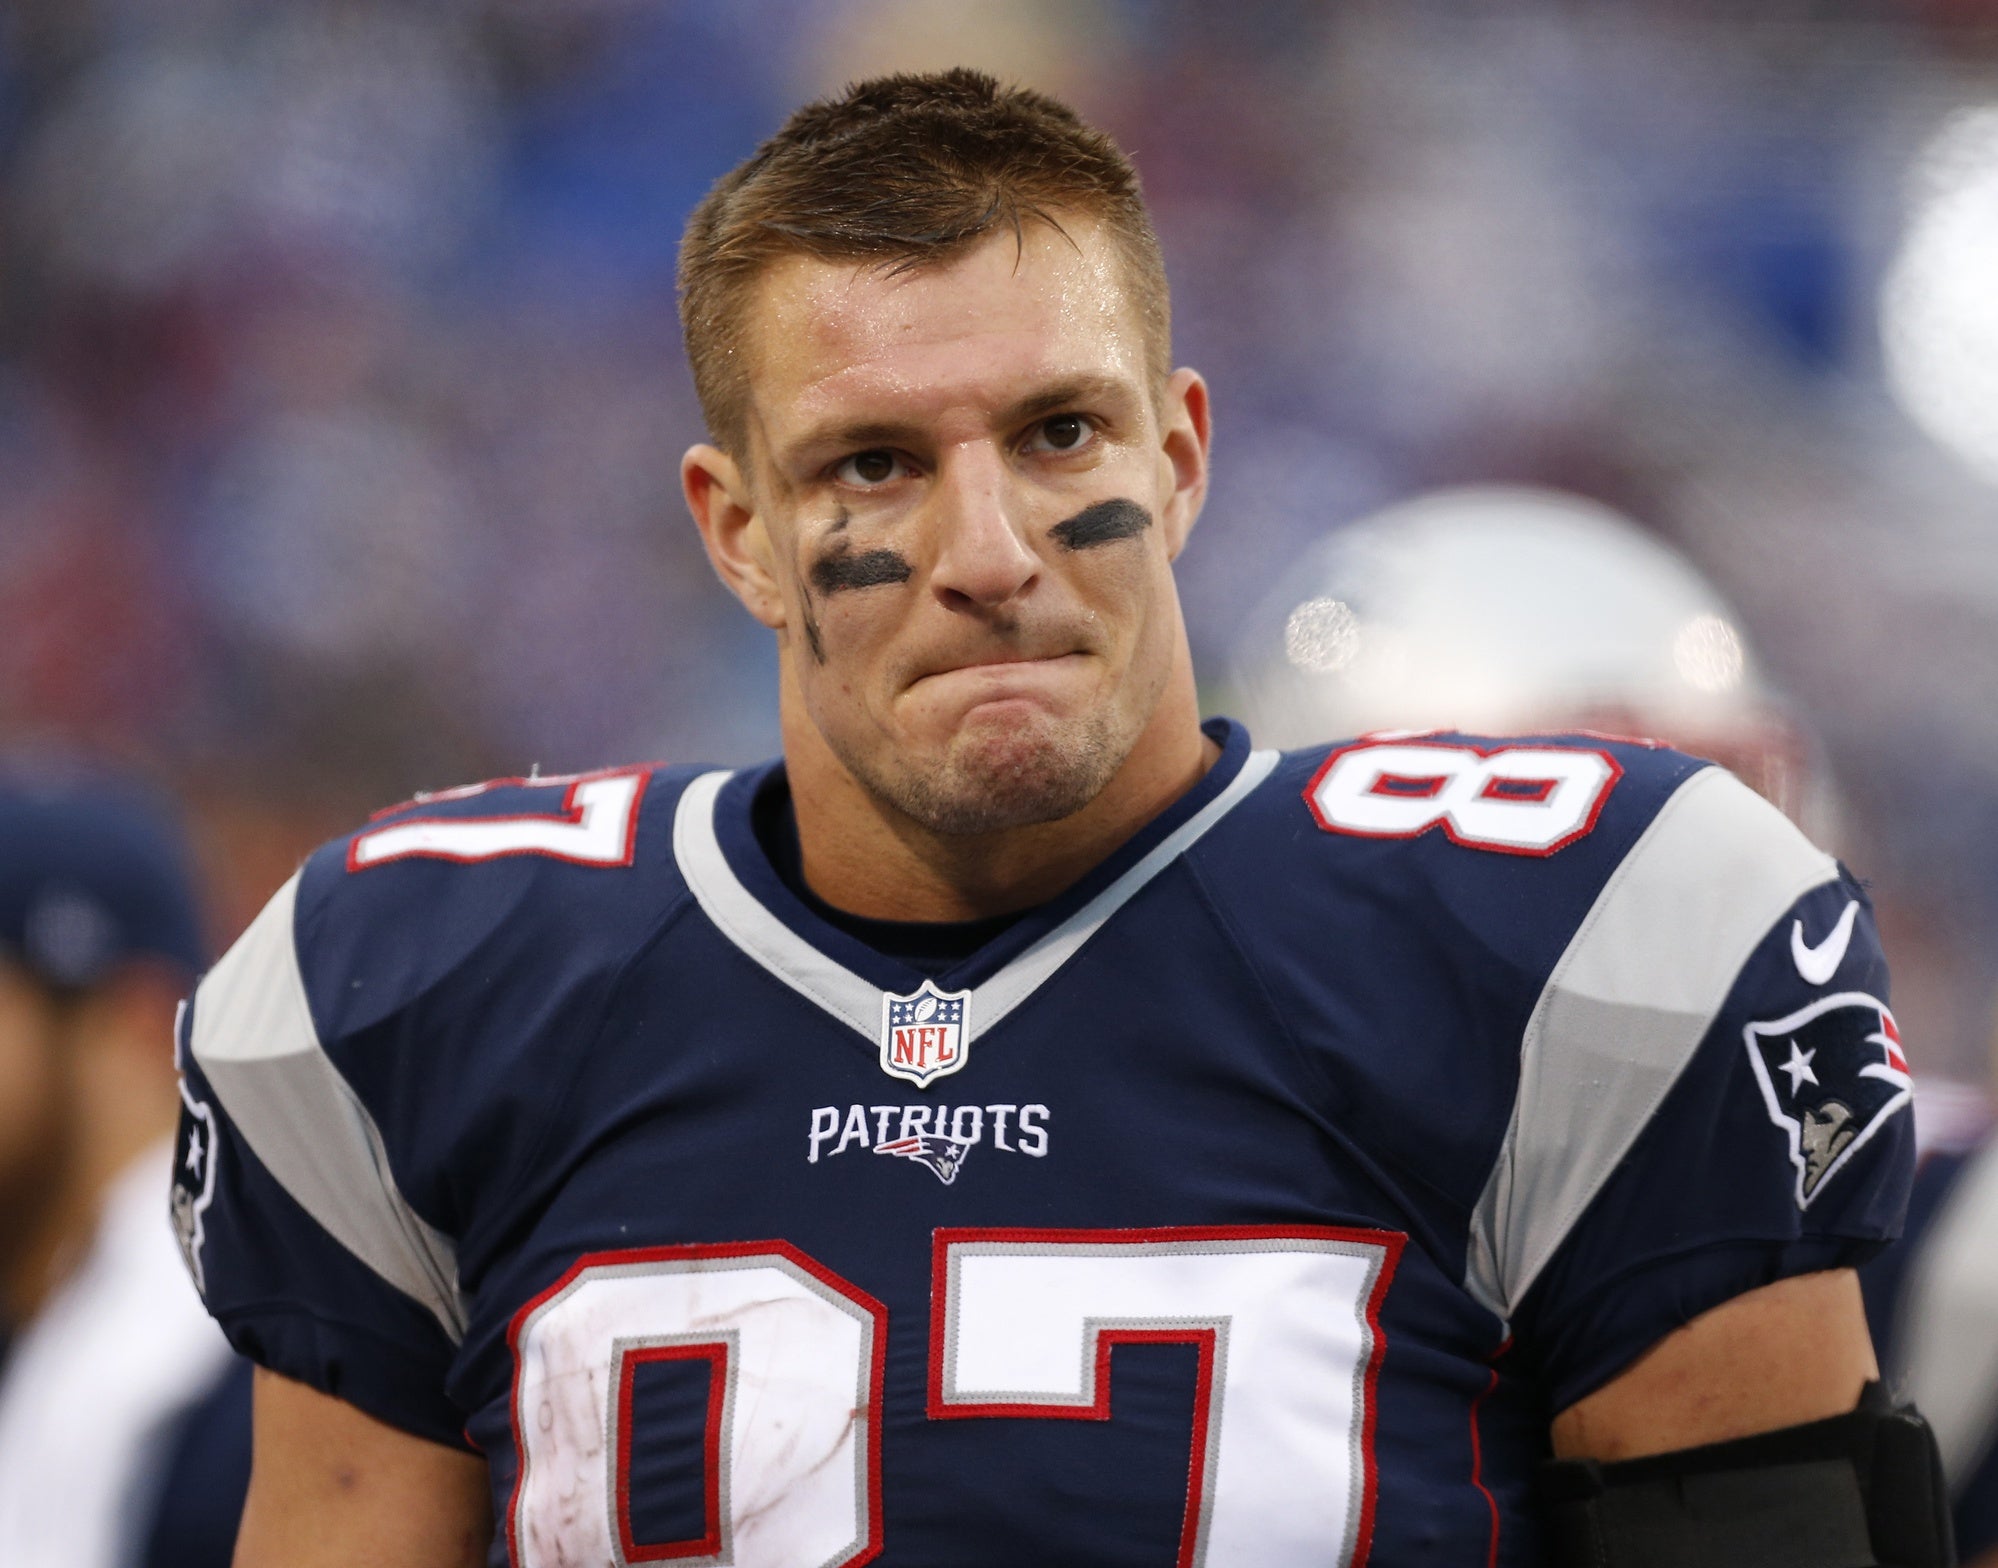 Rob Gronkowski gives confounding response to question about NFL future